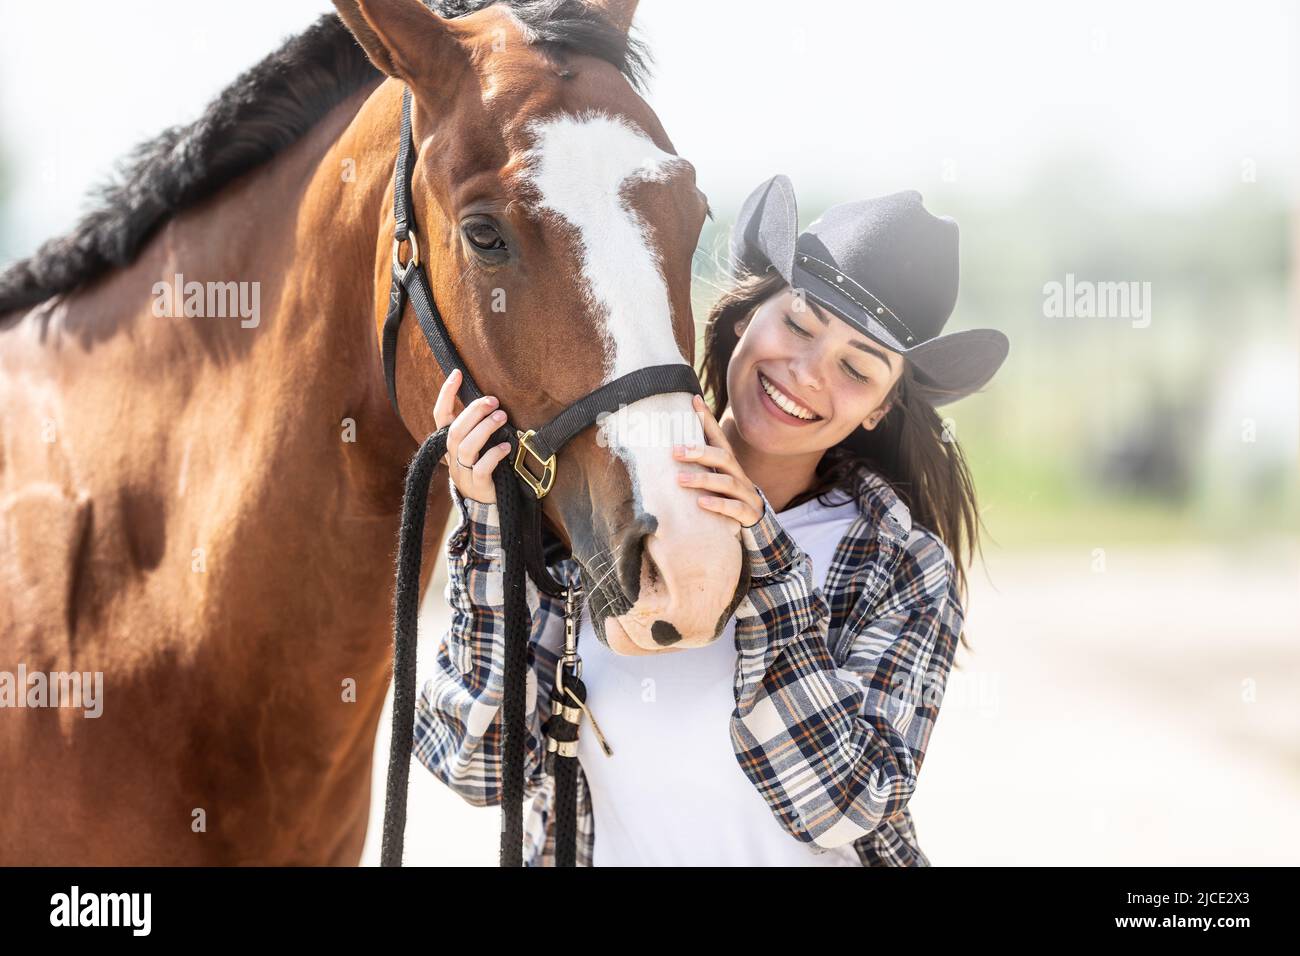 Woman with passion for horses holds and strokes the nose of a horse standing close to it. Stock Photo